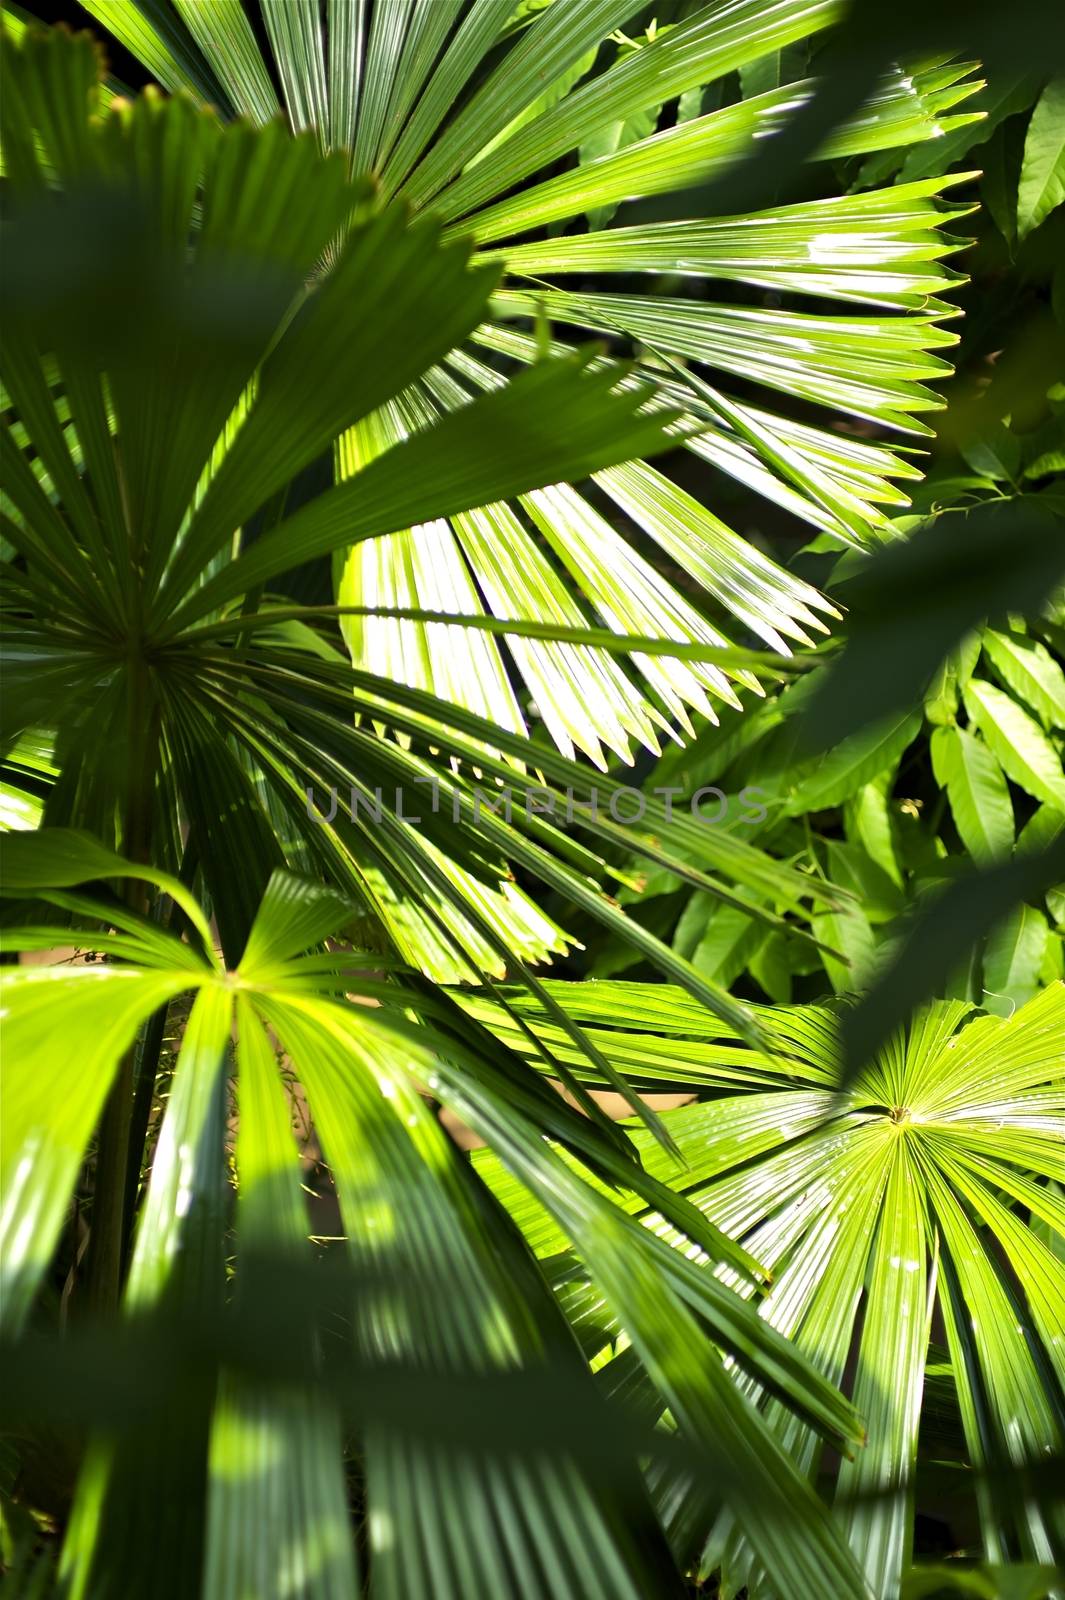 Inside the Jungle. Tropical Plants Vertical Photo. Tropical Photo Collection.